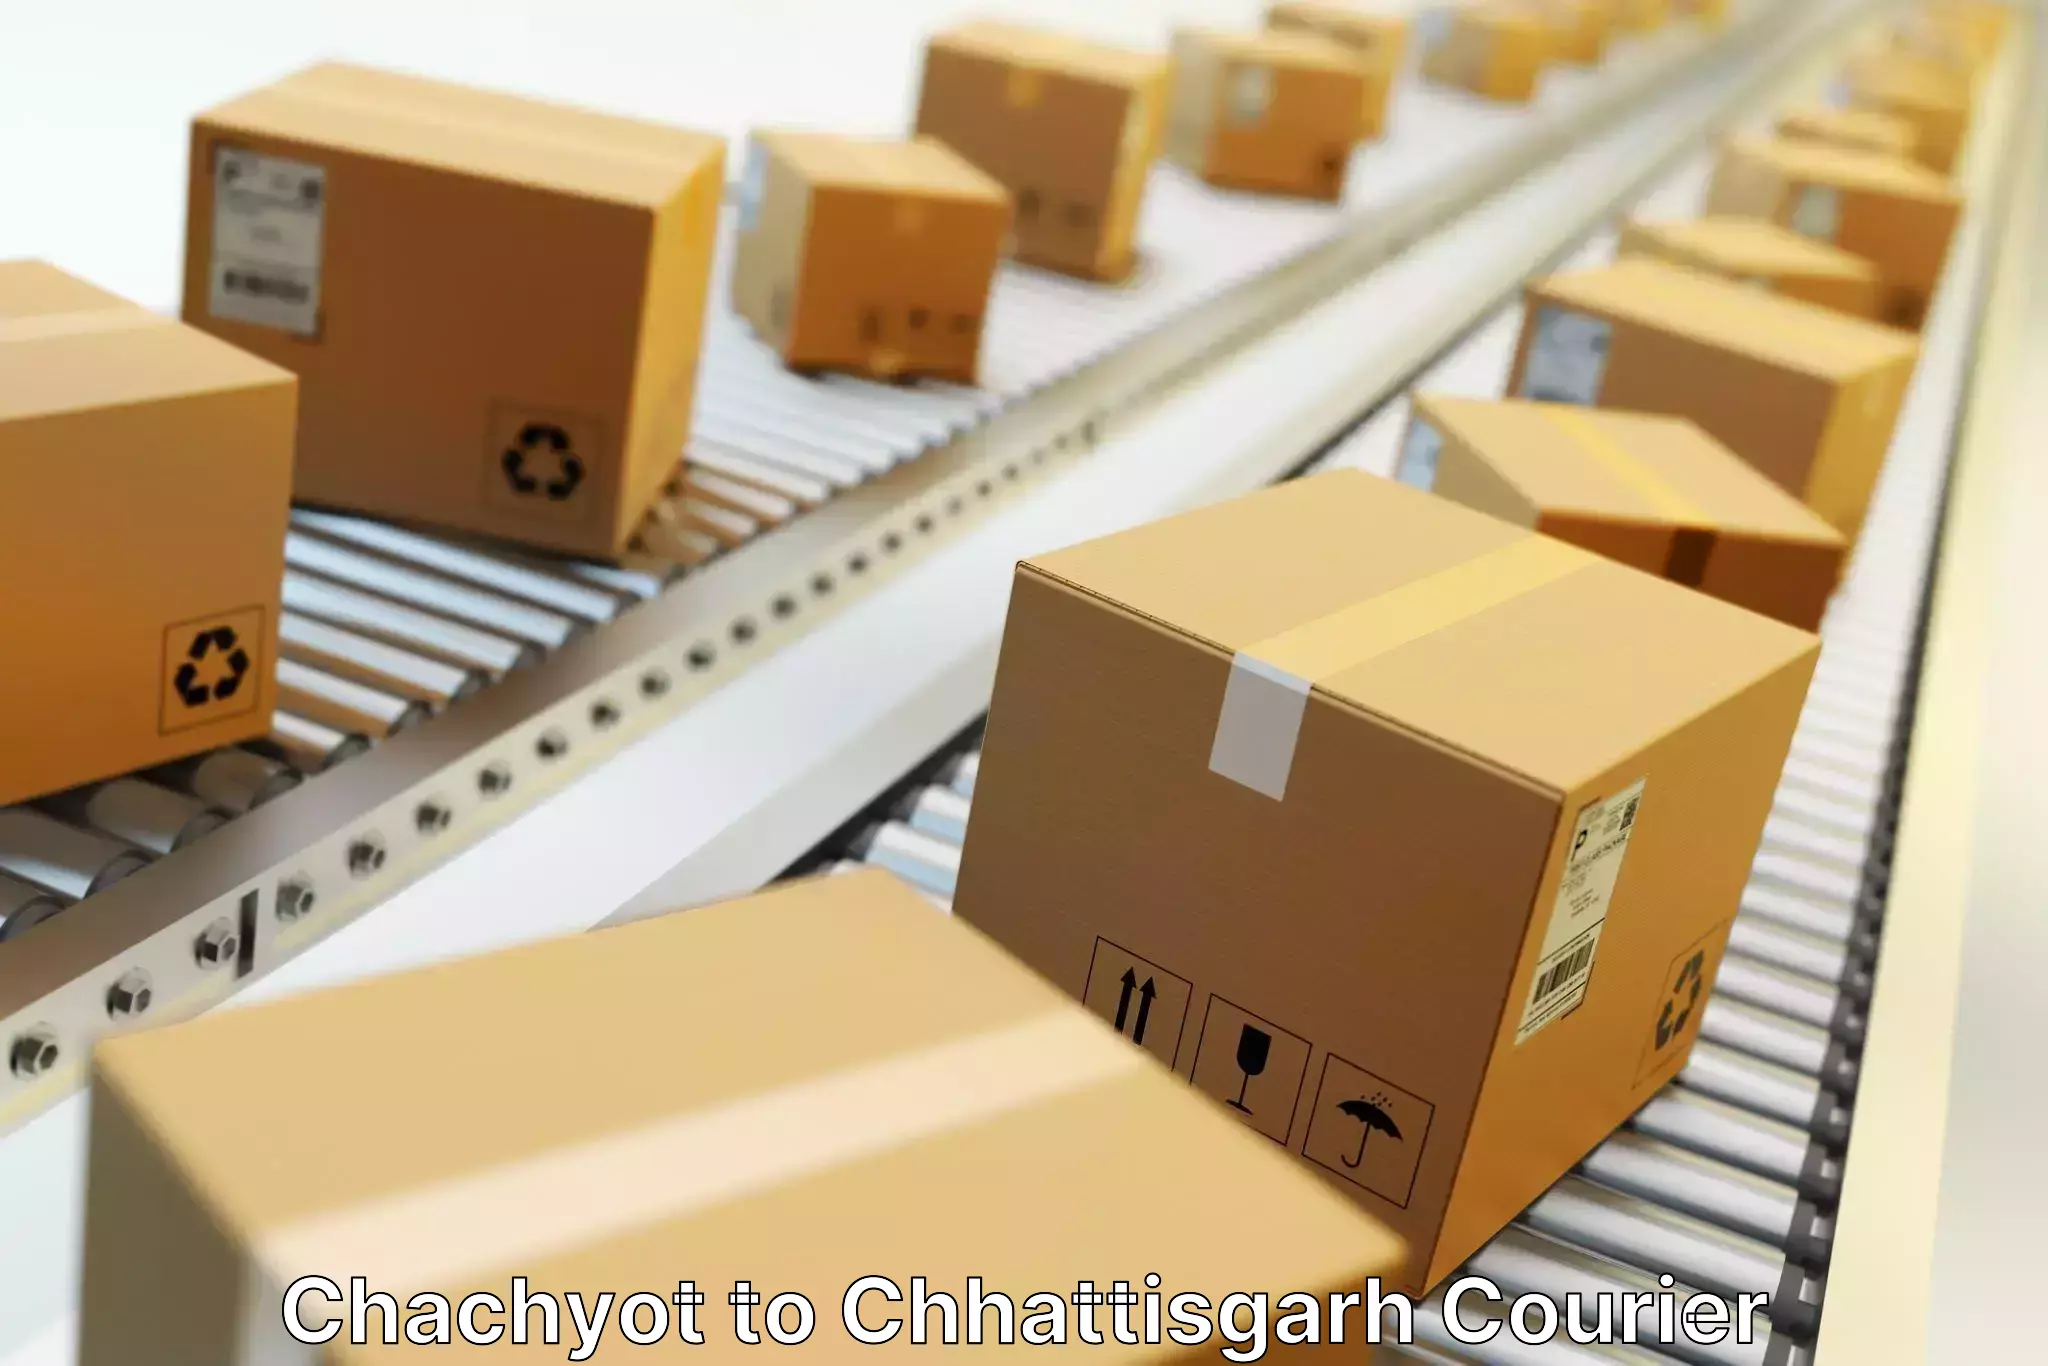 Global shipping networks Chachyot to Rajnandgaon